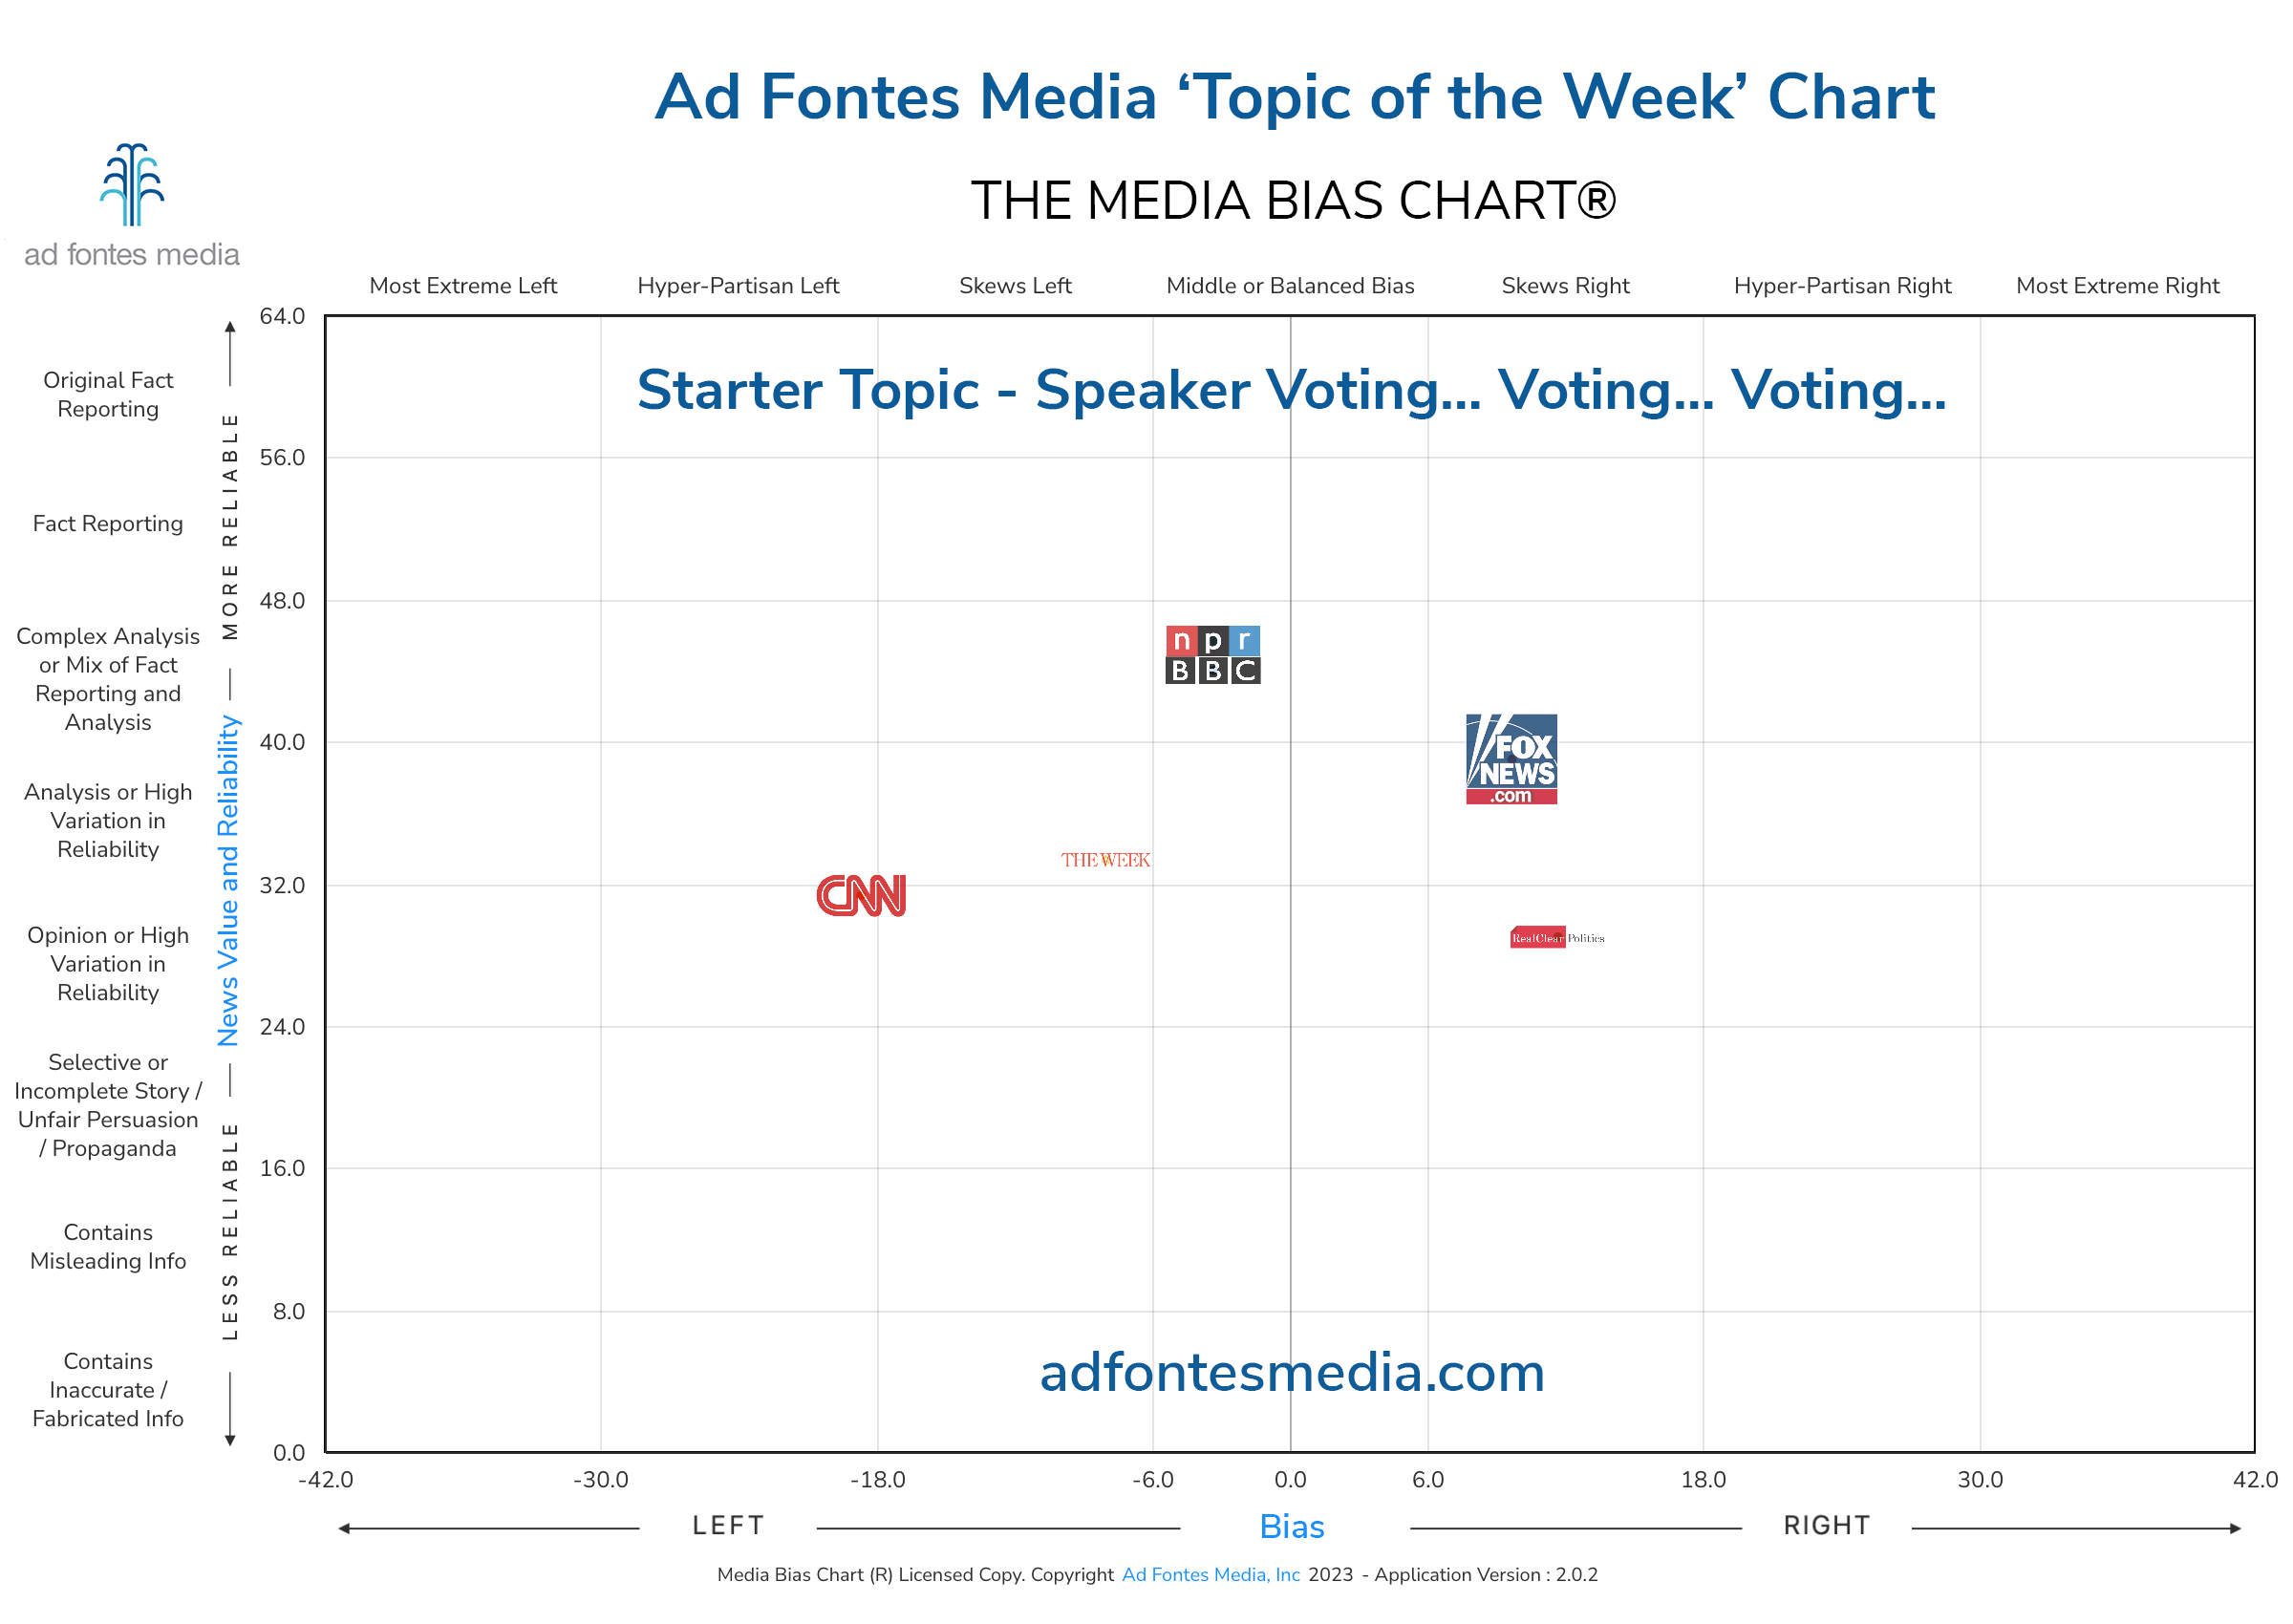 Scores of the Speaker Voting… Voting… Voting… articles on the chart